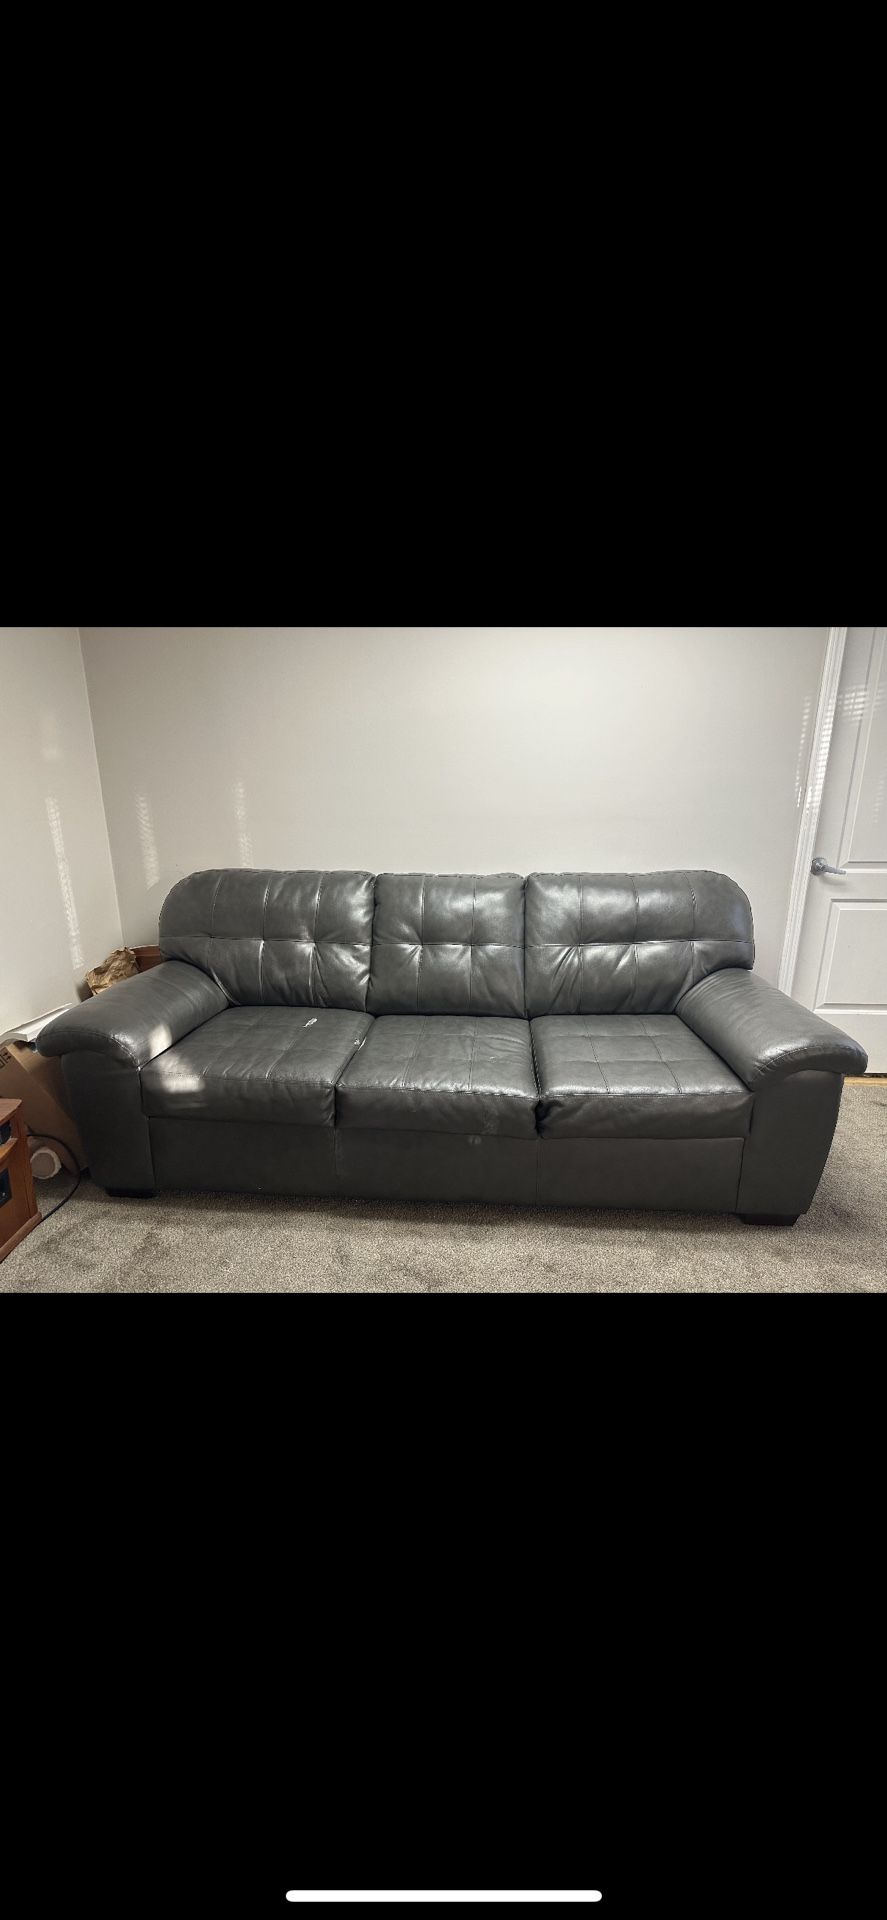 Comfy Leather Couch 